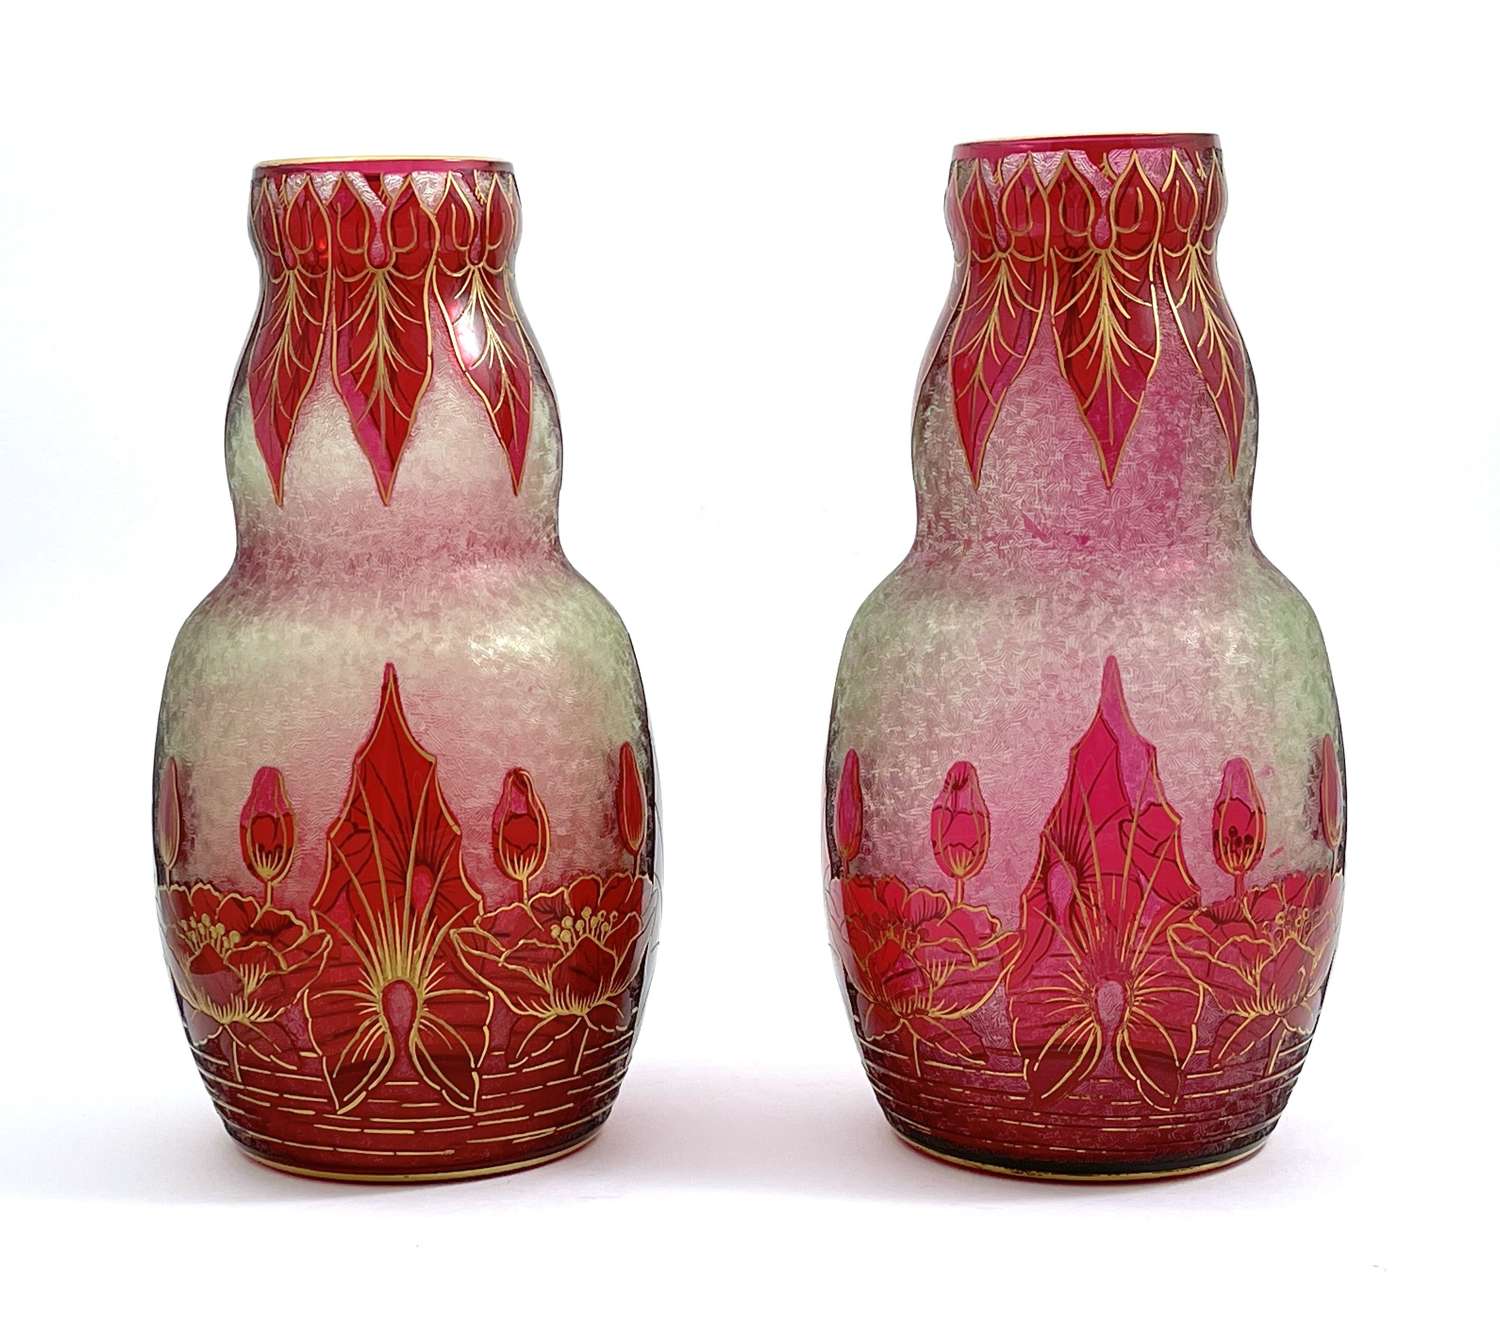 A Fabulous Pair of Antique Baccarat Cameo Vases by Bourgeois Depose.